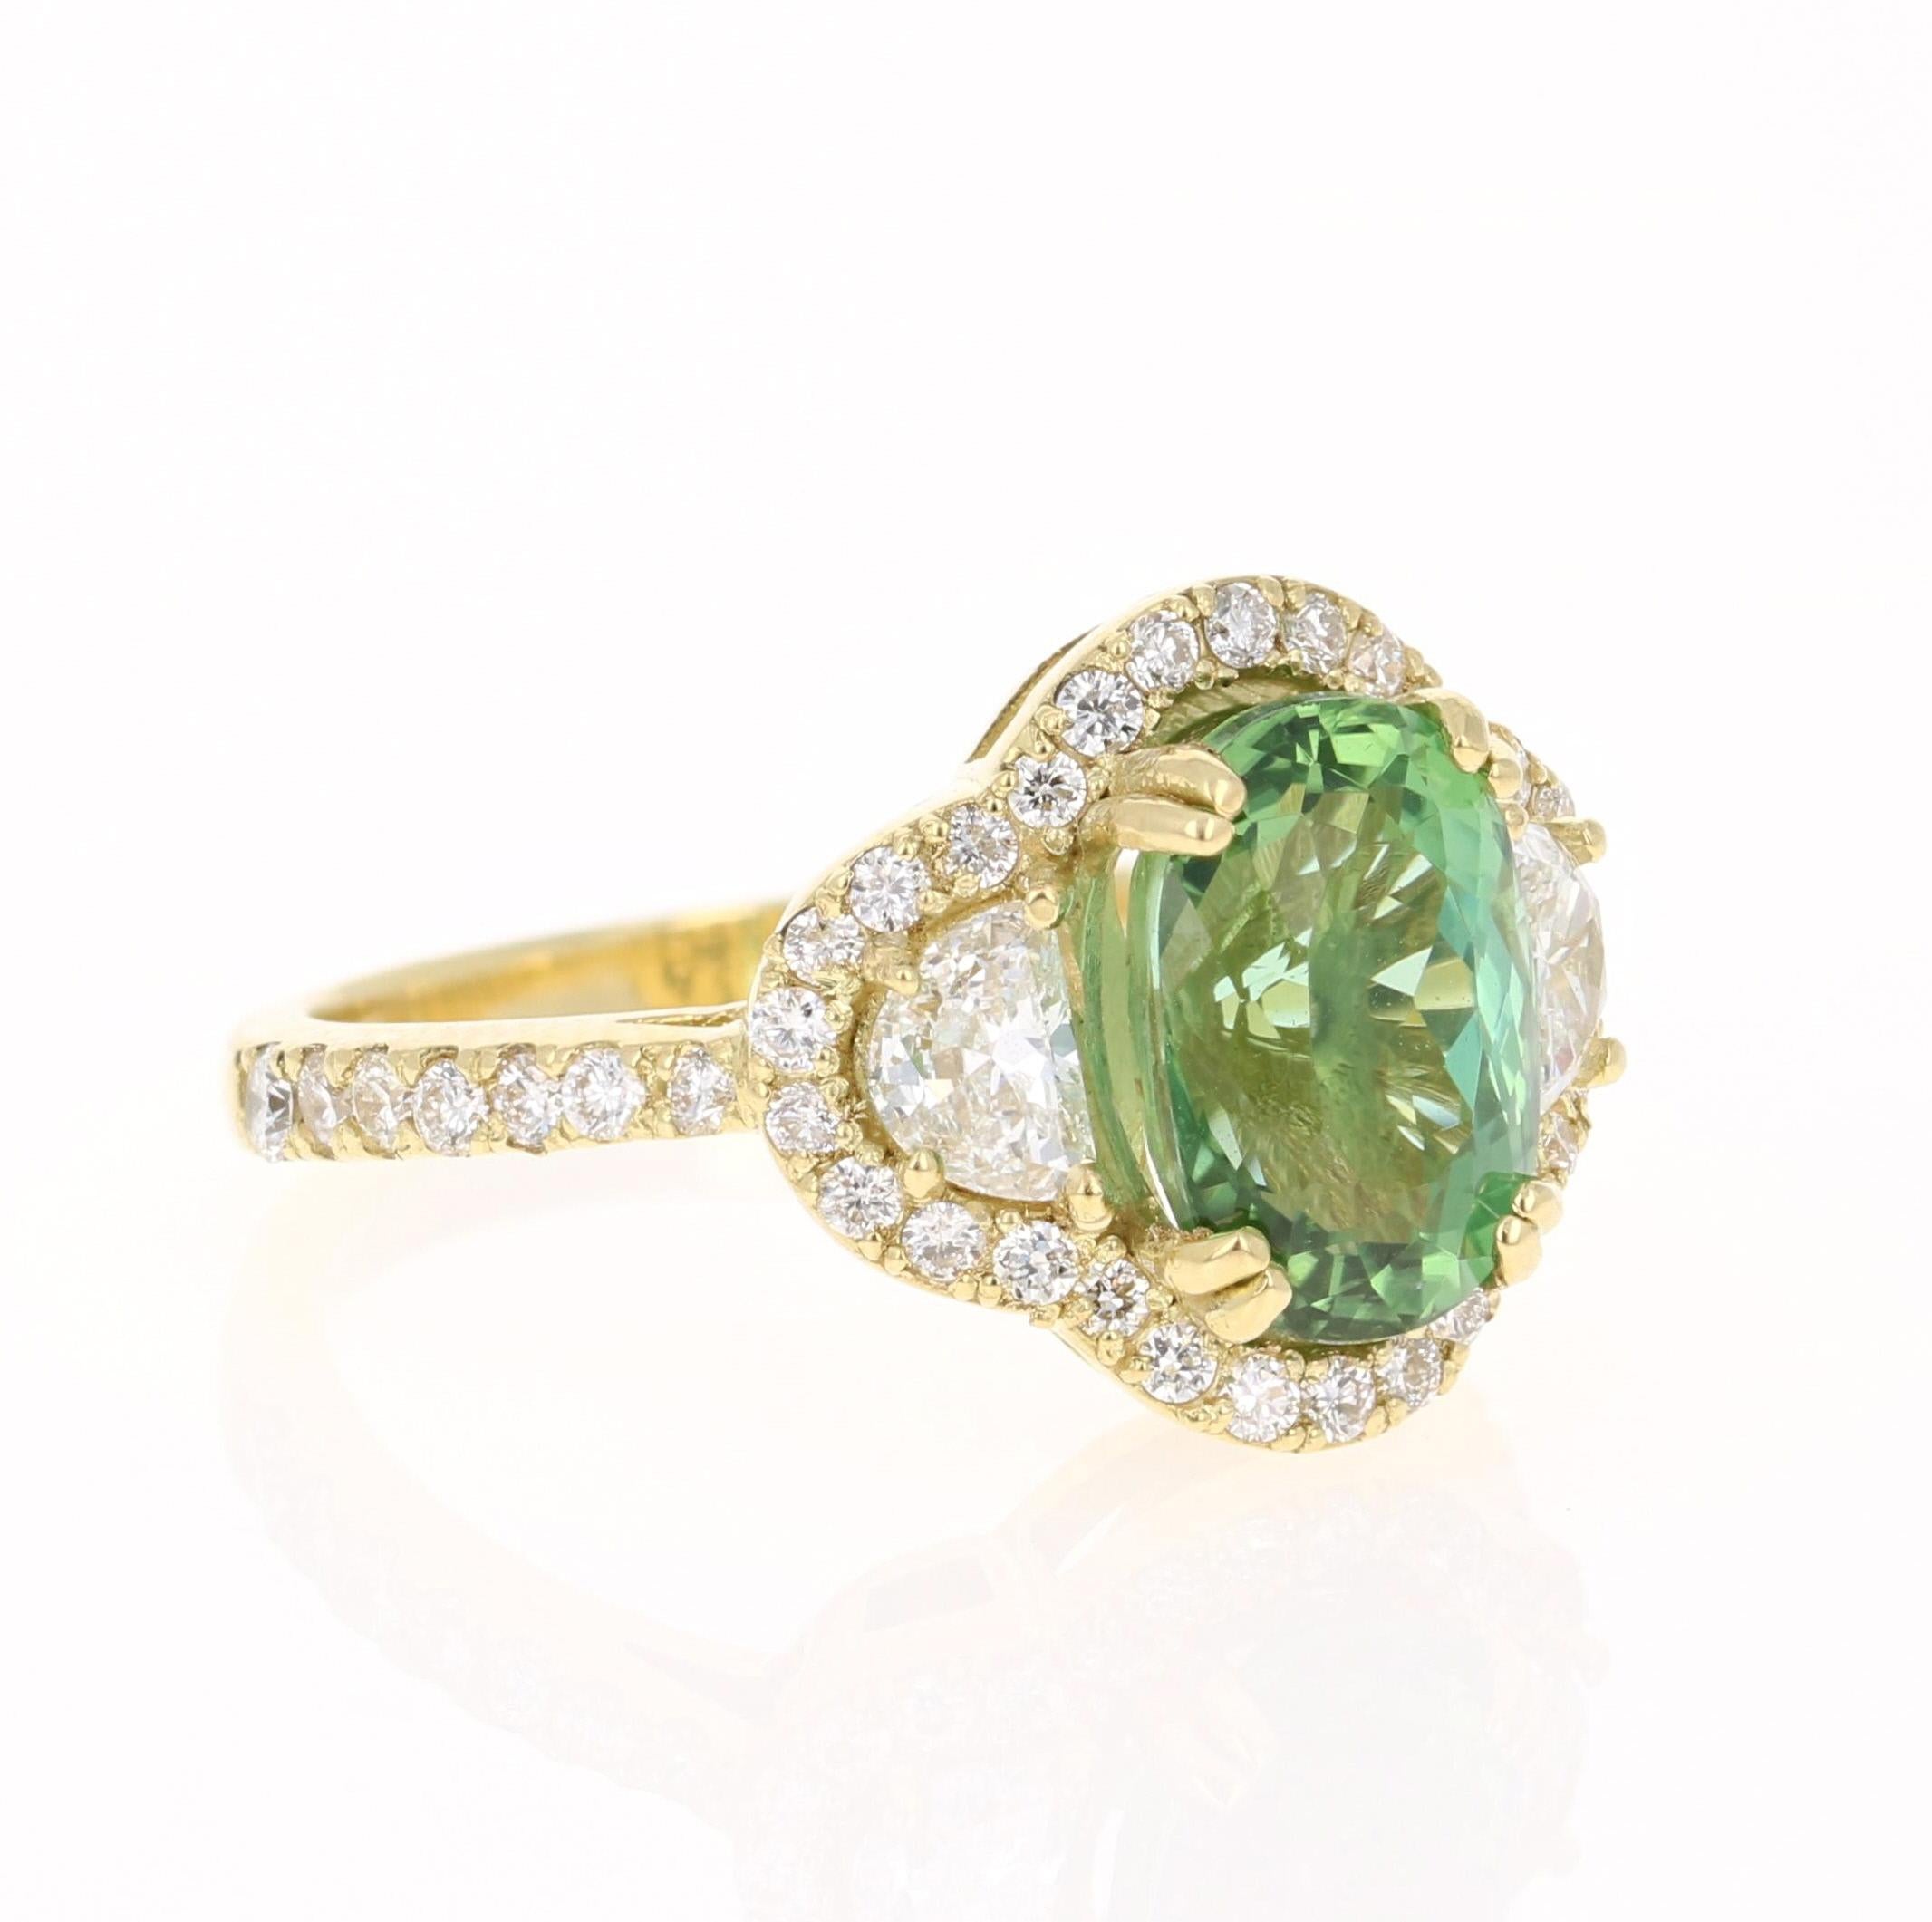 A unique beauty that is sure to be a rare and gorgeous design! Very much inspired by the articulate designs of the art-deco era.

This stunner has a gorgeous Oval Cut leafy Green Tourmaline that weighs 3.06 Carats. Adjacent to the tourmaline are 2